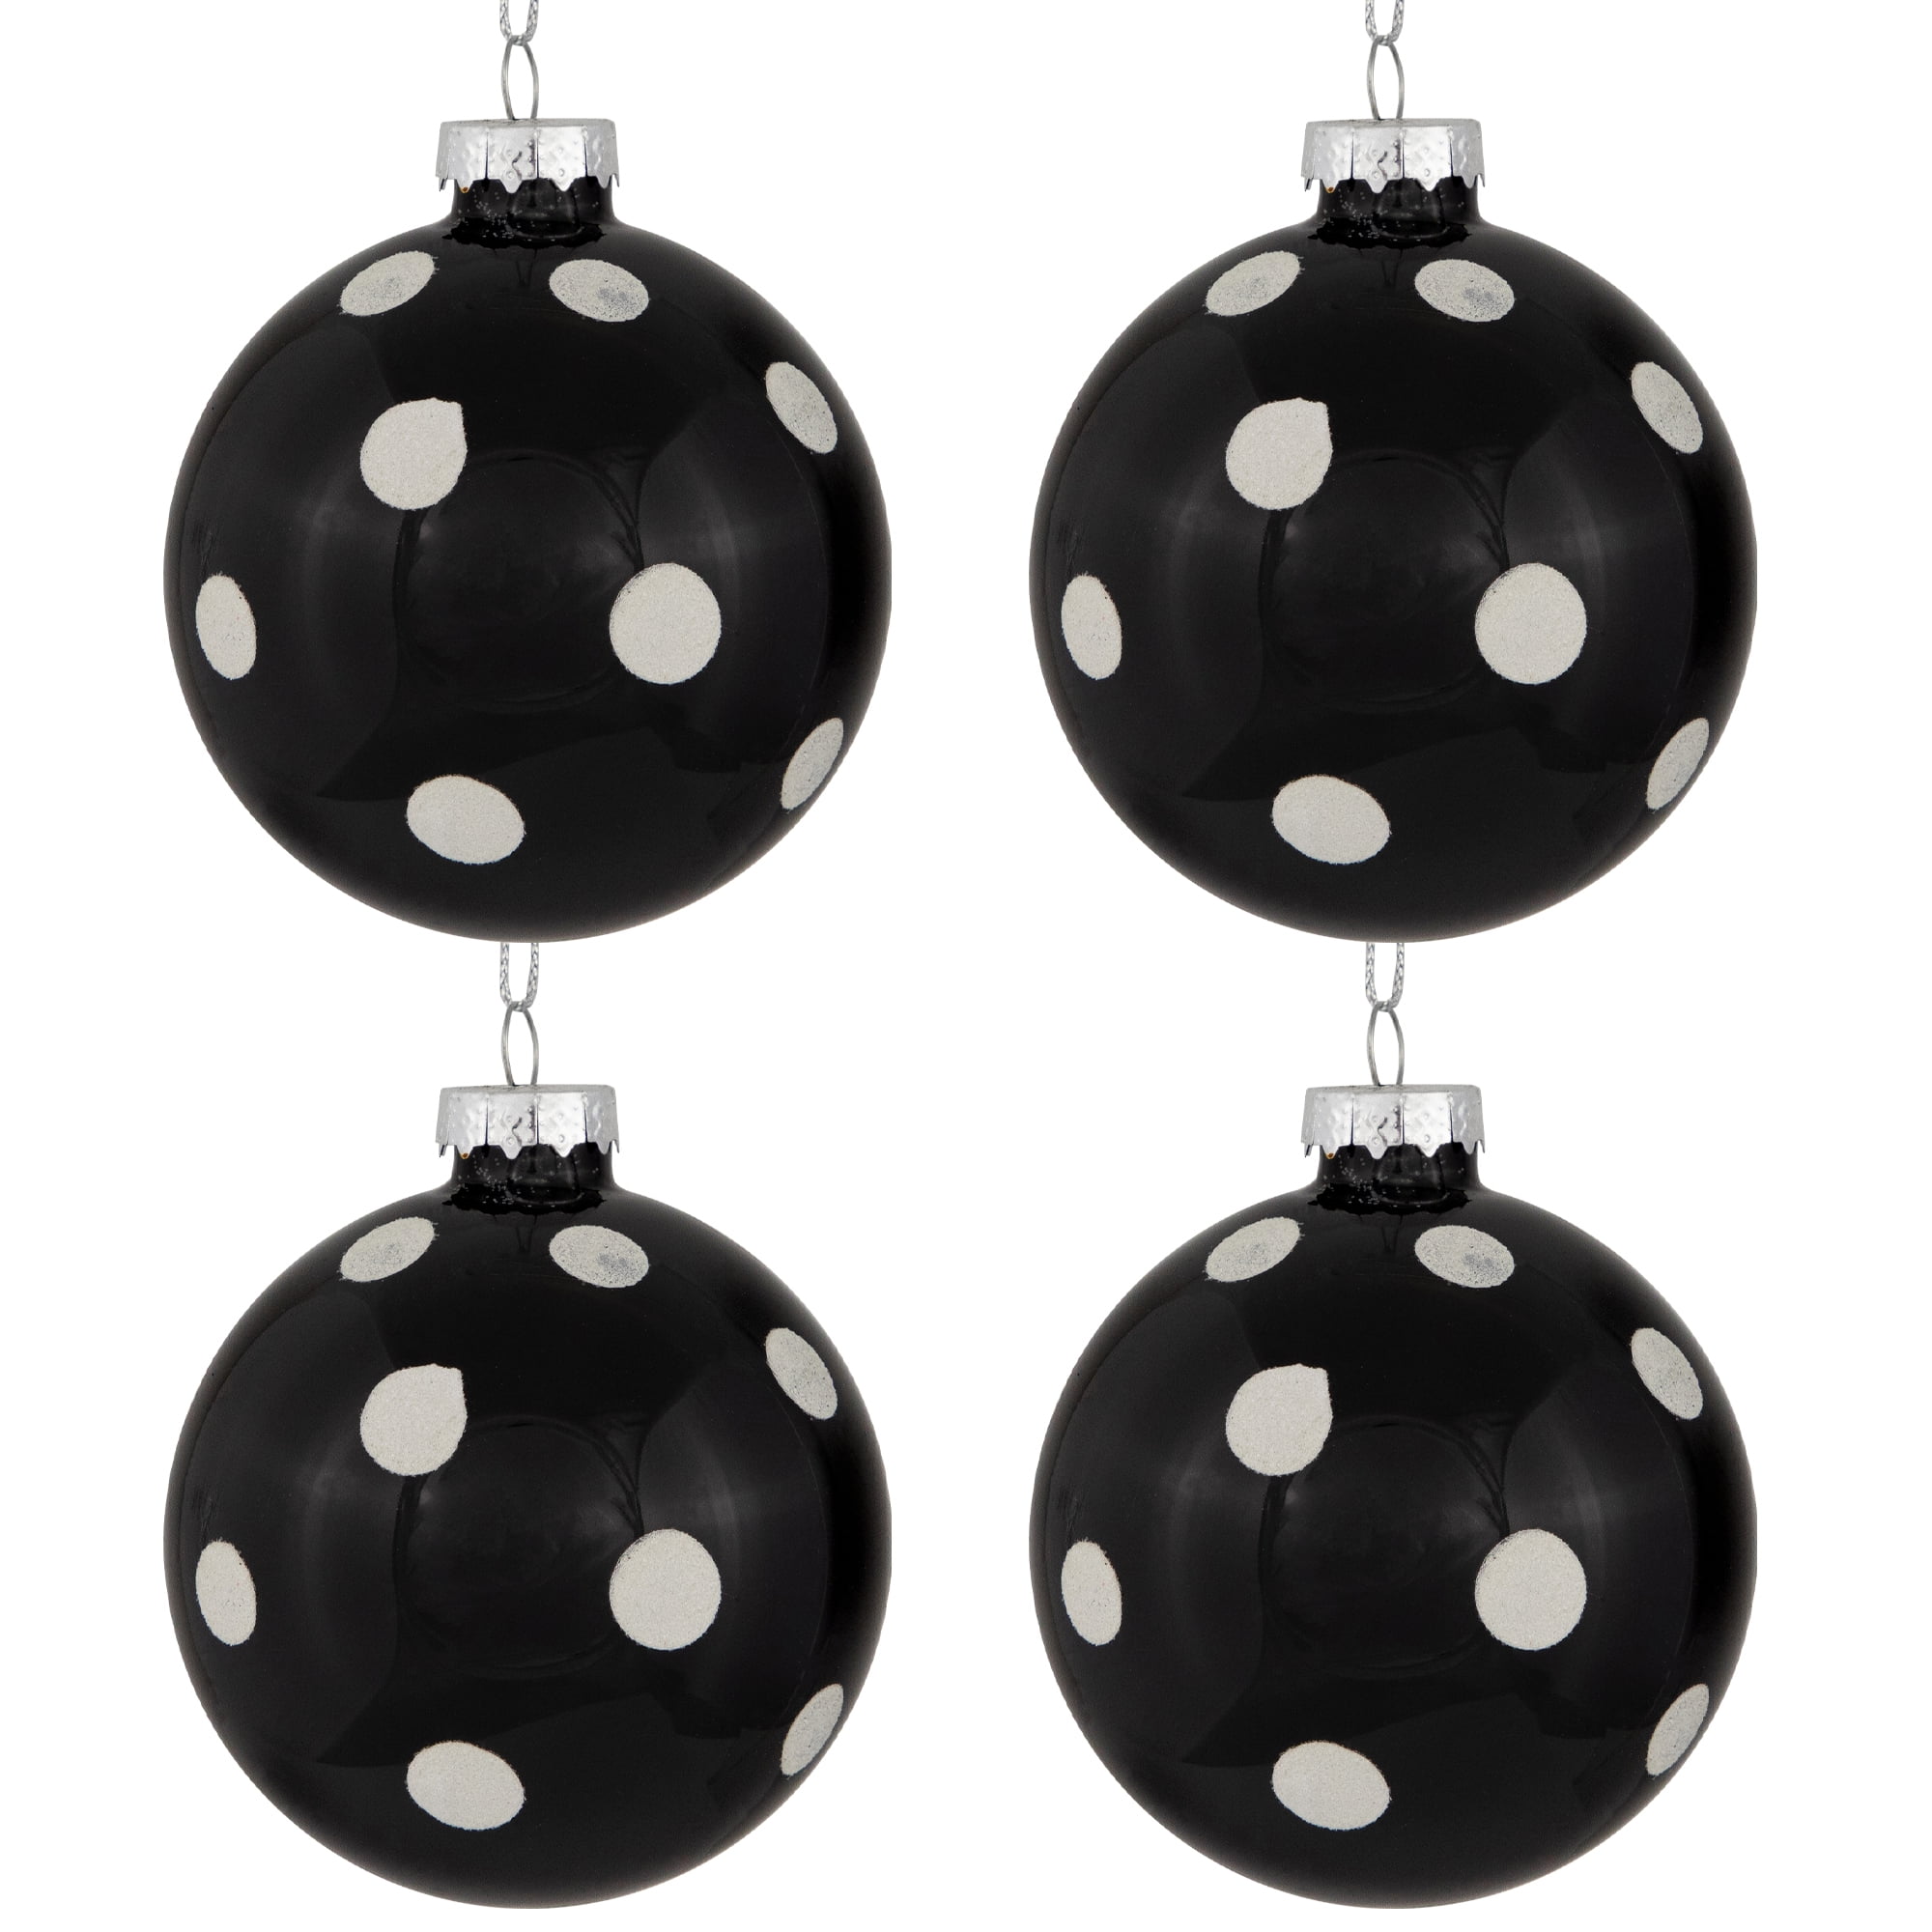 4 Pieces Christmas Ball Dillards Ornaments Black Color Hanging